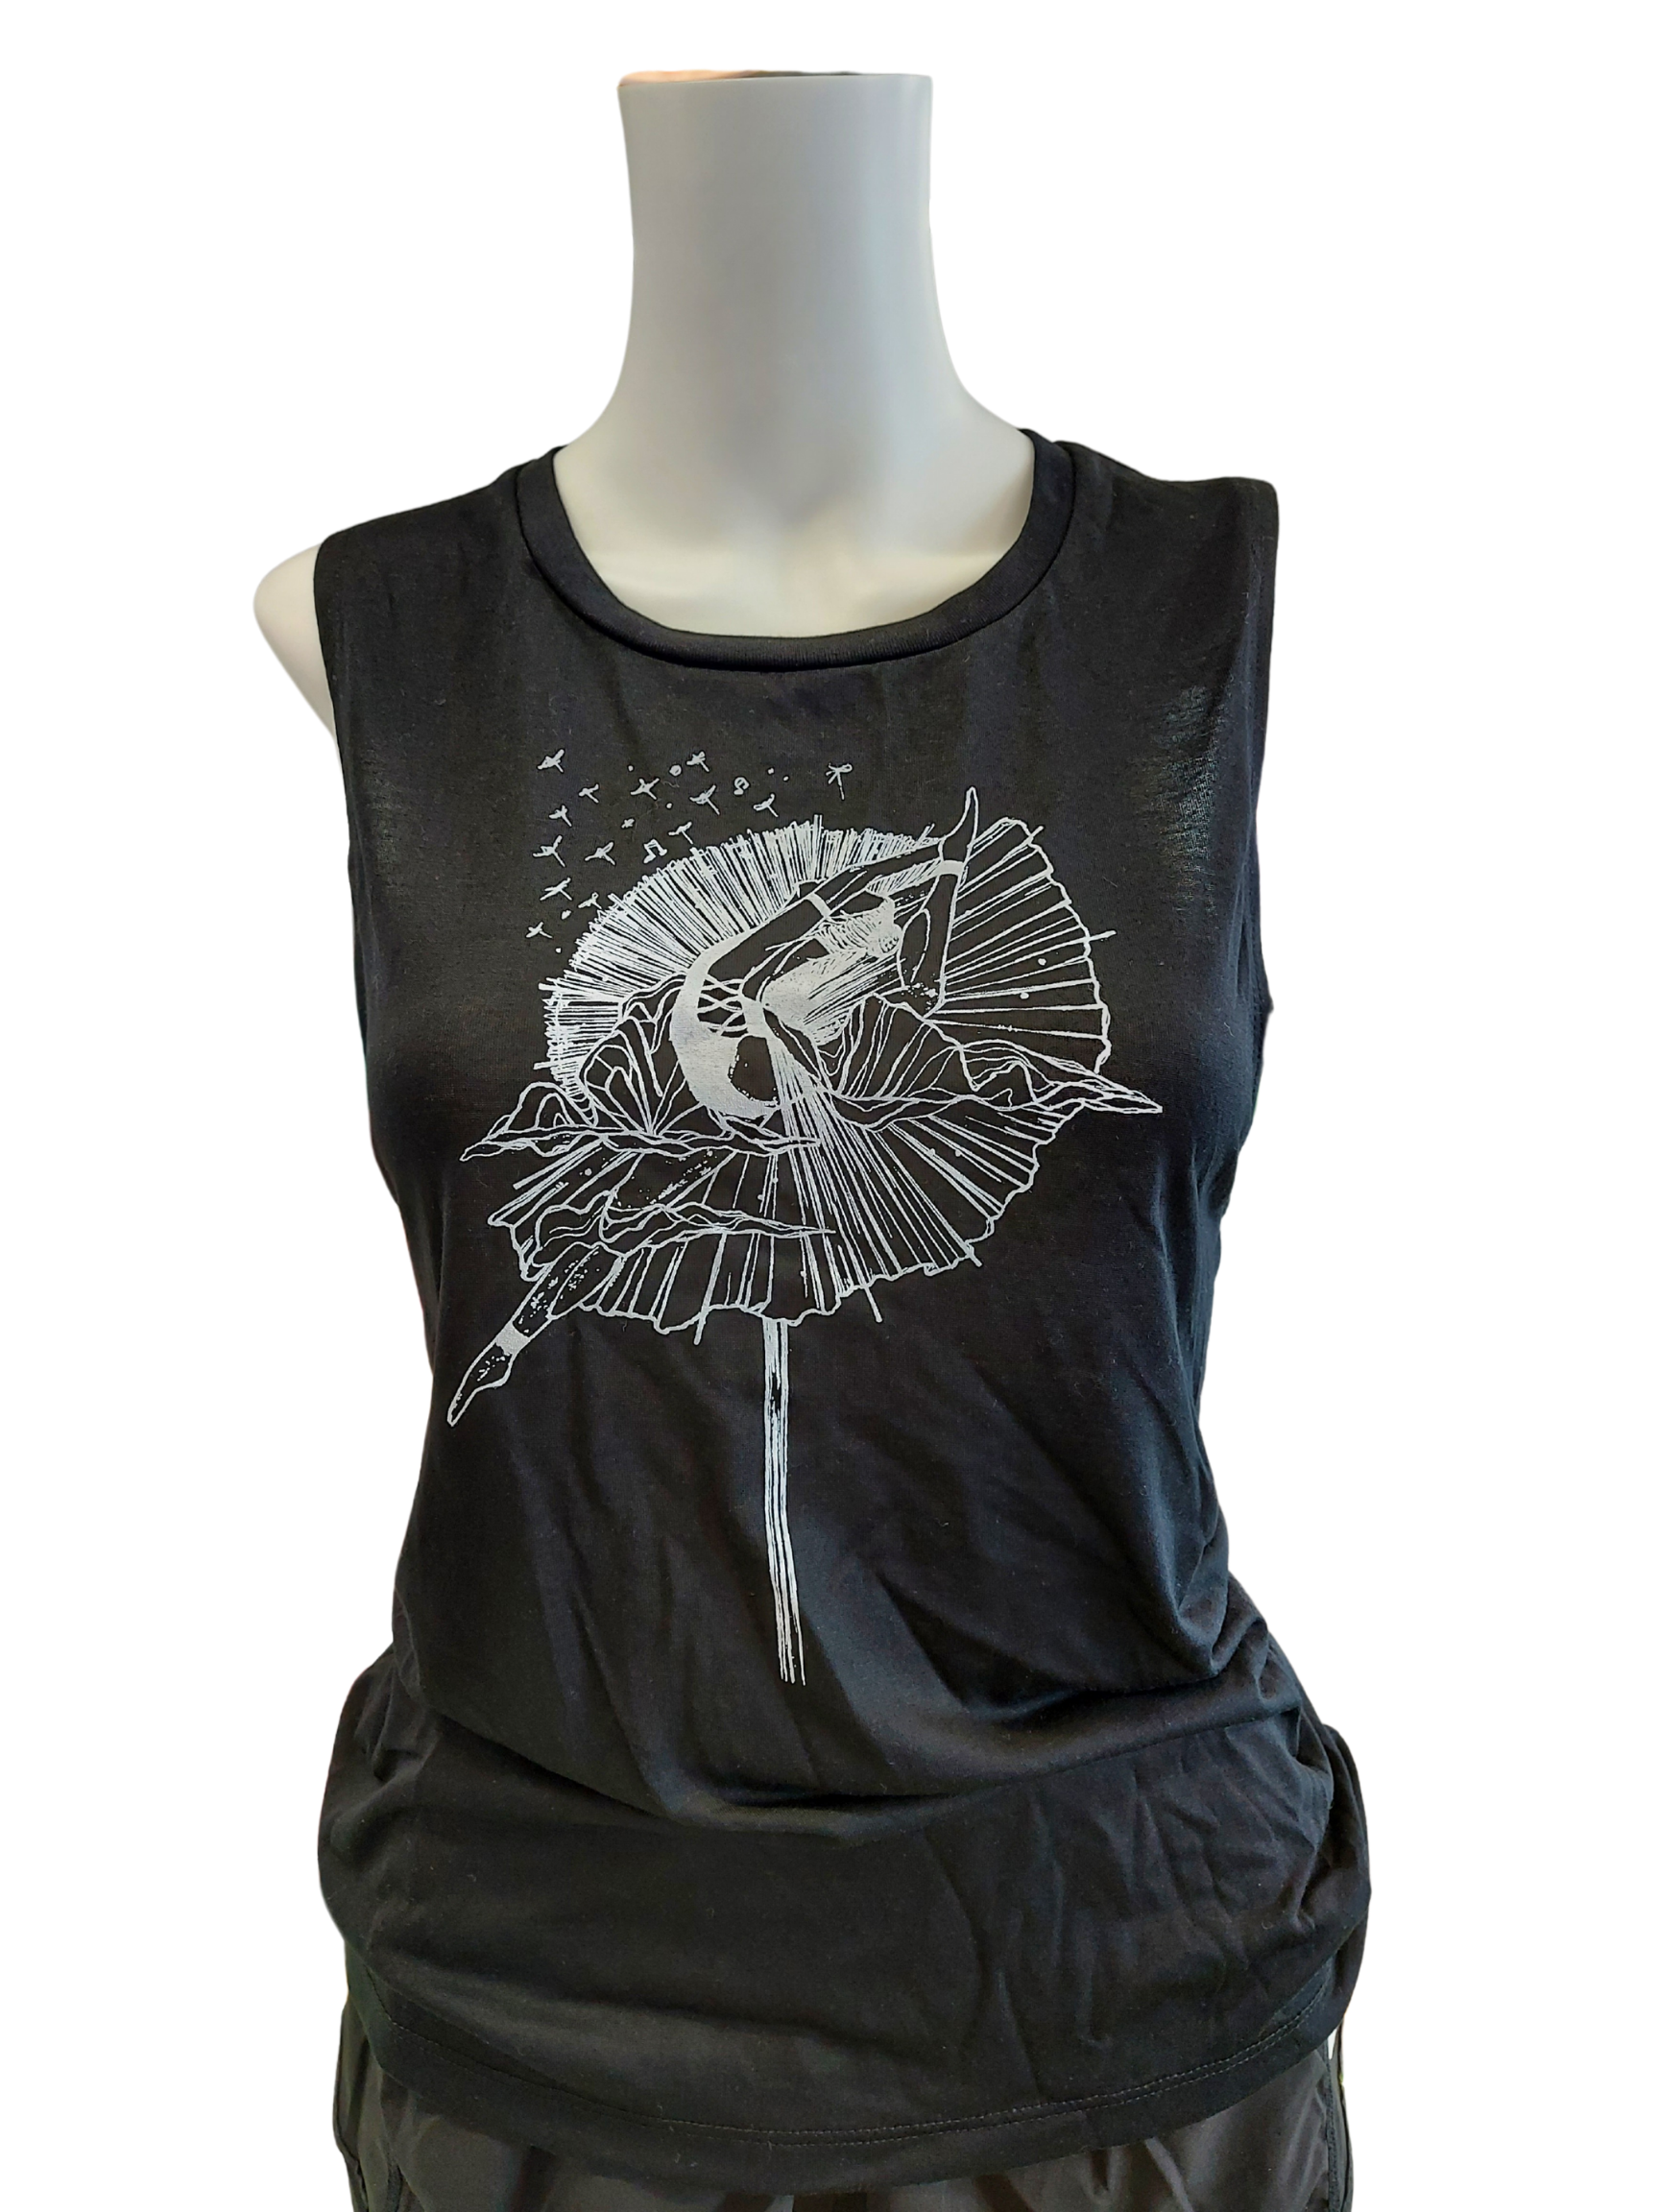 Buy online high quality The MVMNT Printed Scoop Tank - The Movement Boutique - Kelowna